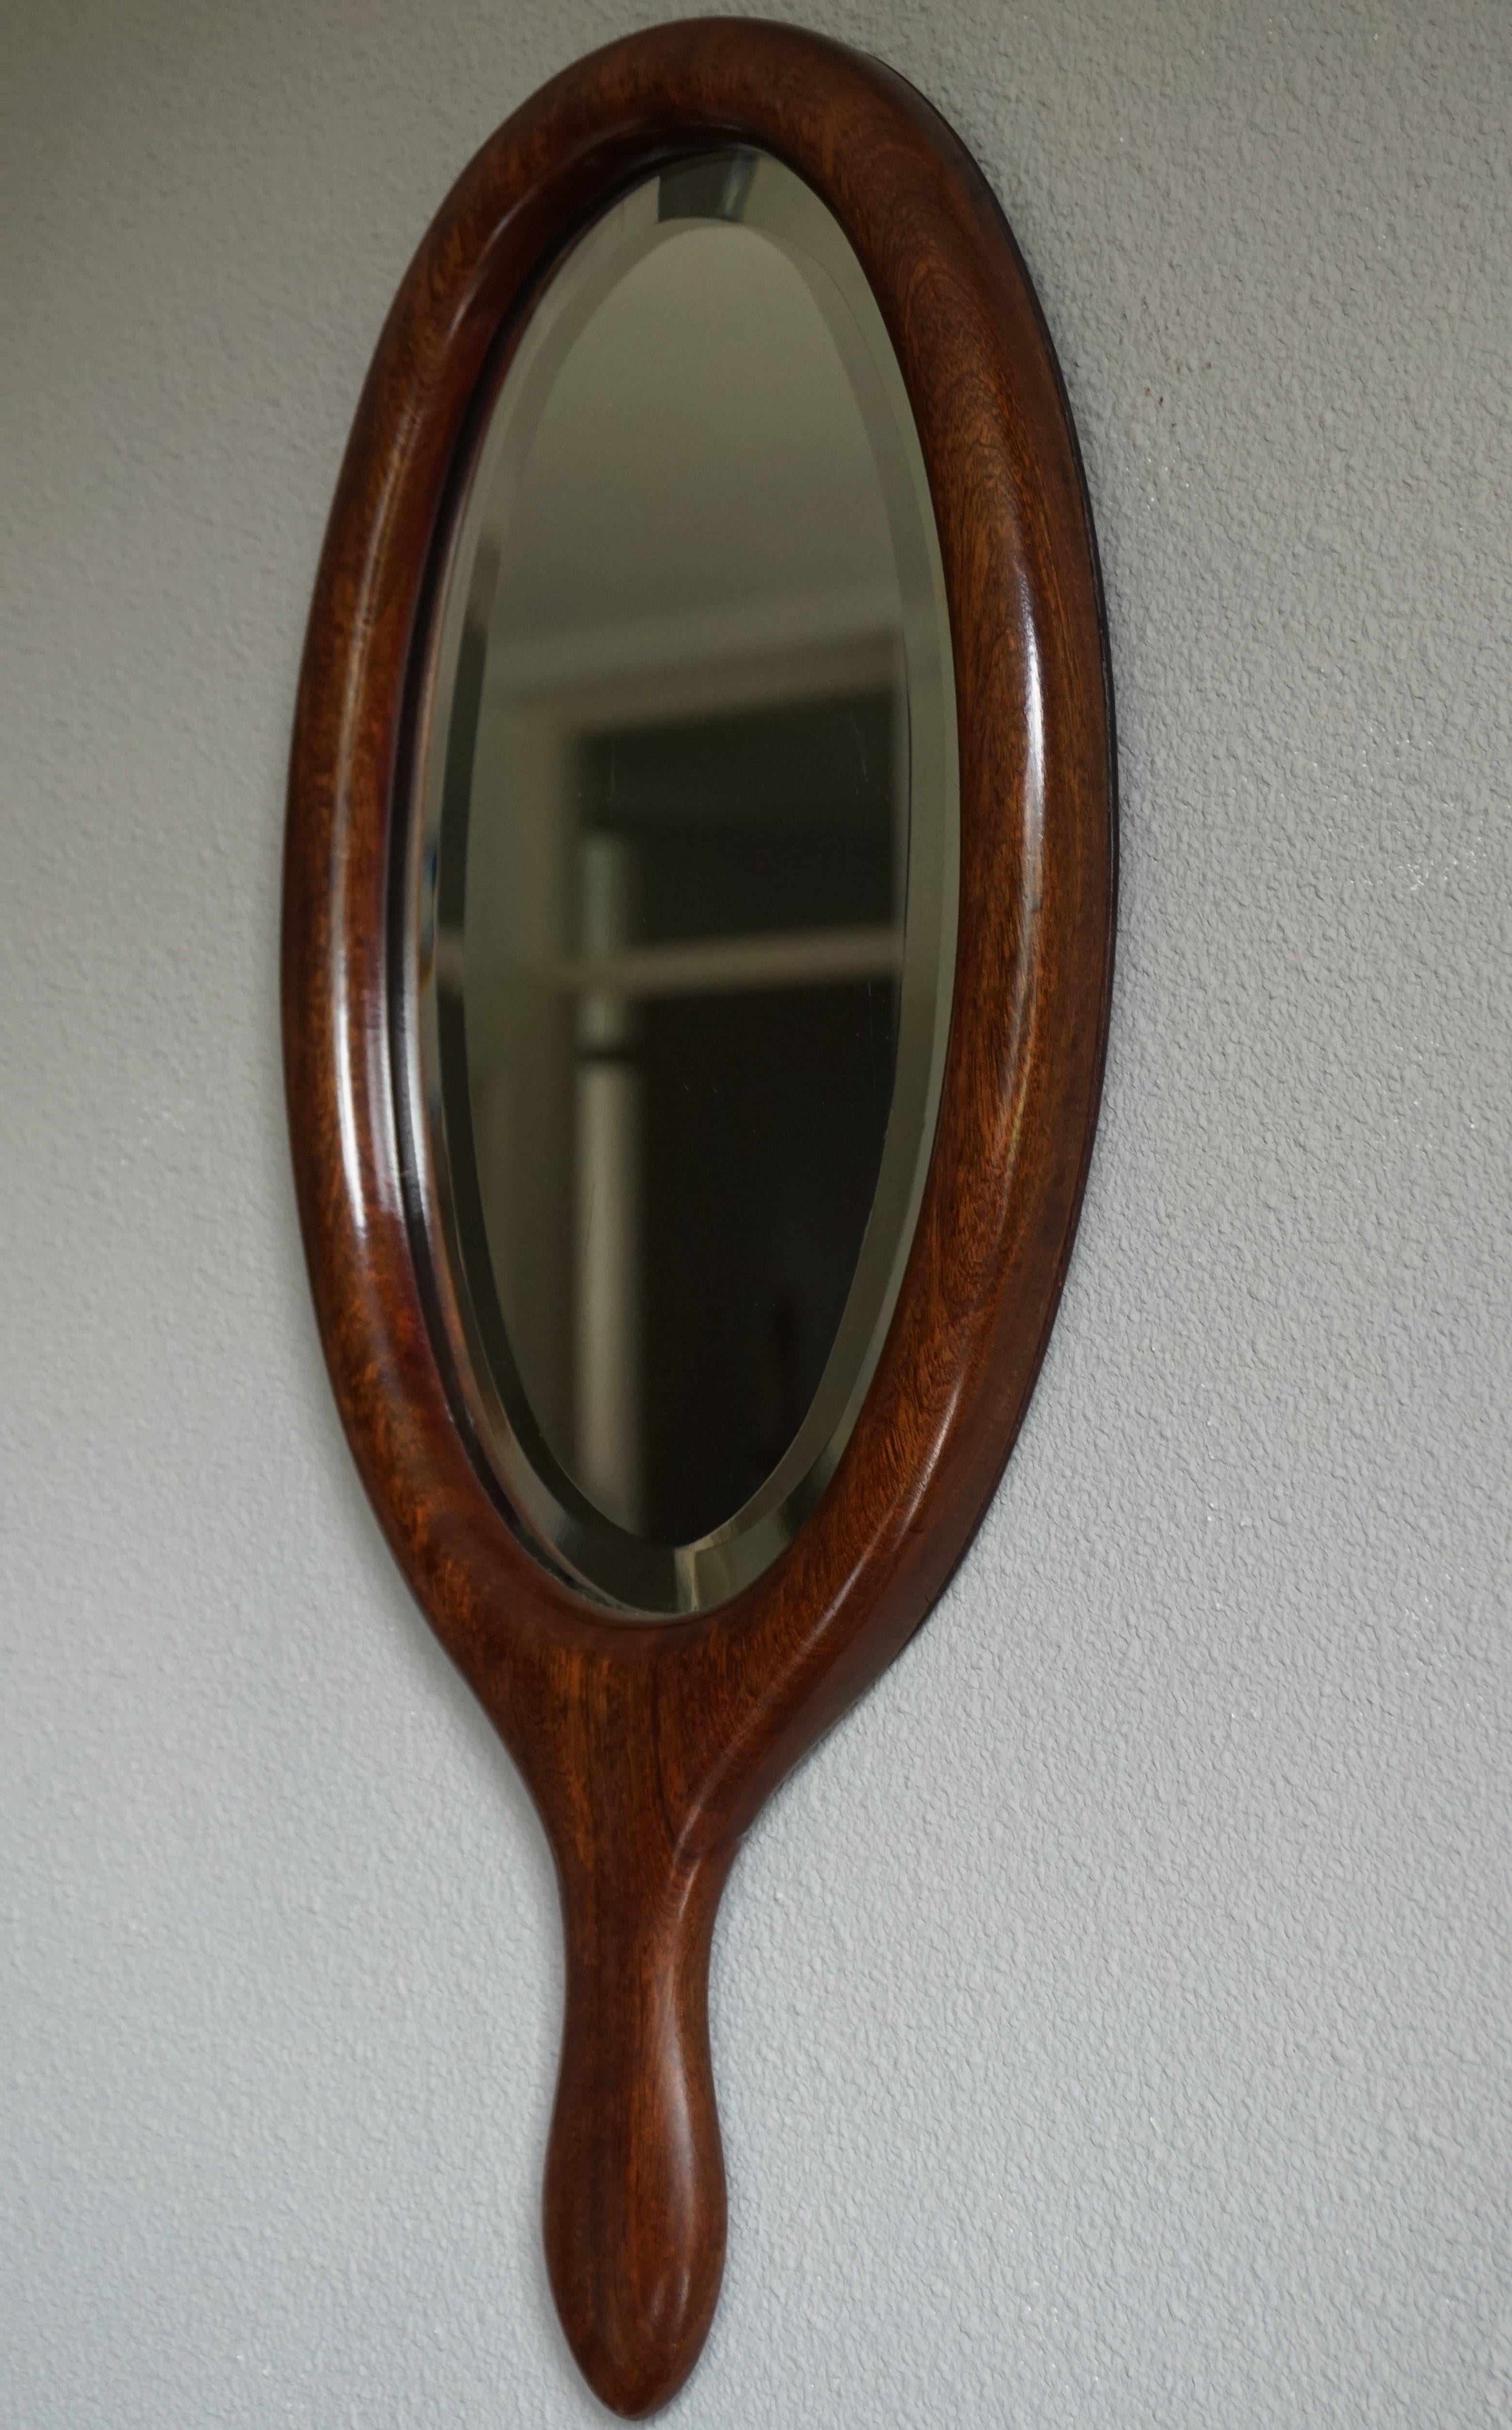 Antique 19th Century Handcrafted Nutwood & Beveled Glass Hand or Vanity Mirror For Sale 9